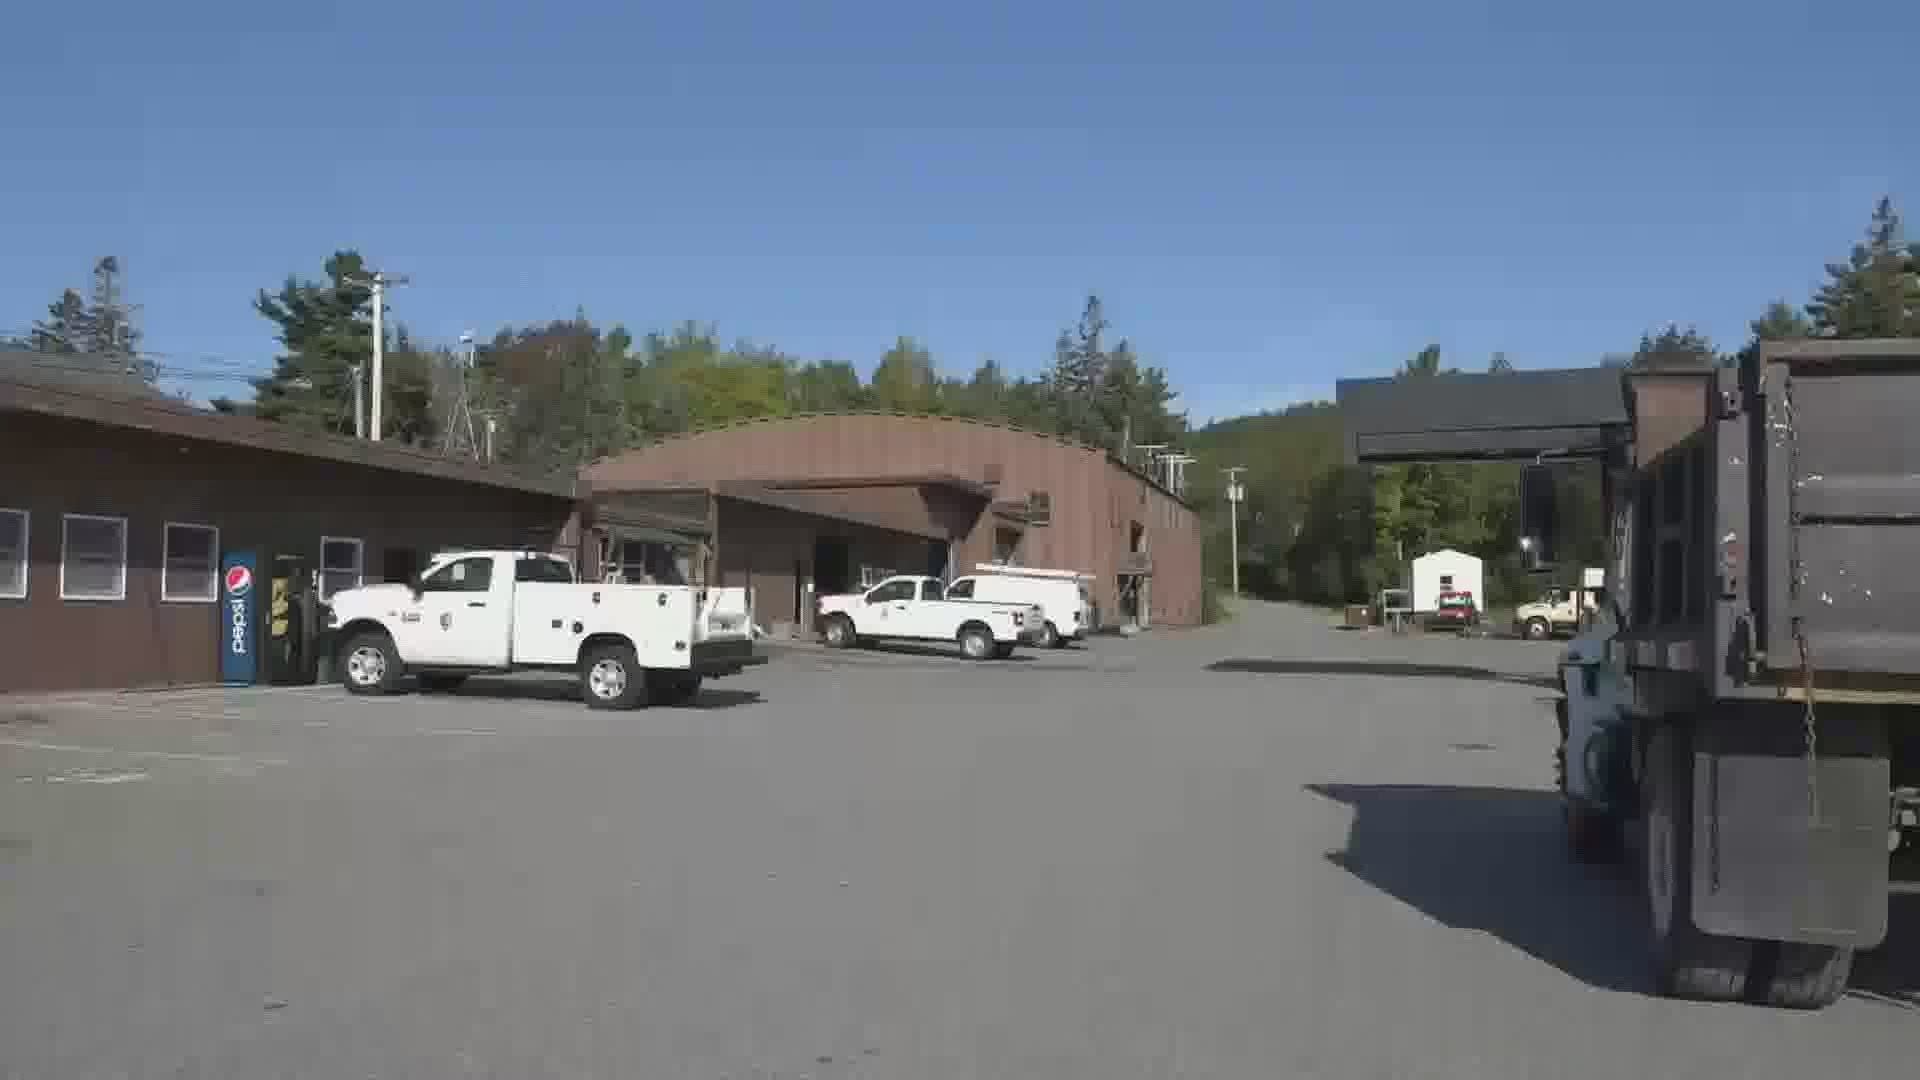 Acadia National Park staff members are hoping to receive funding from the Great American Outdoors Act to redo the park's maintenance facility and other projects.